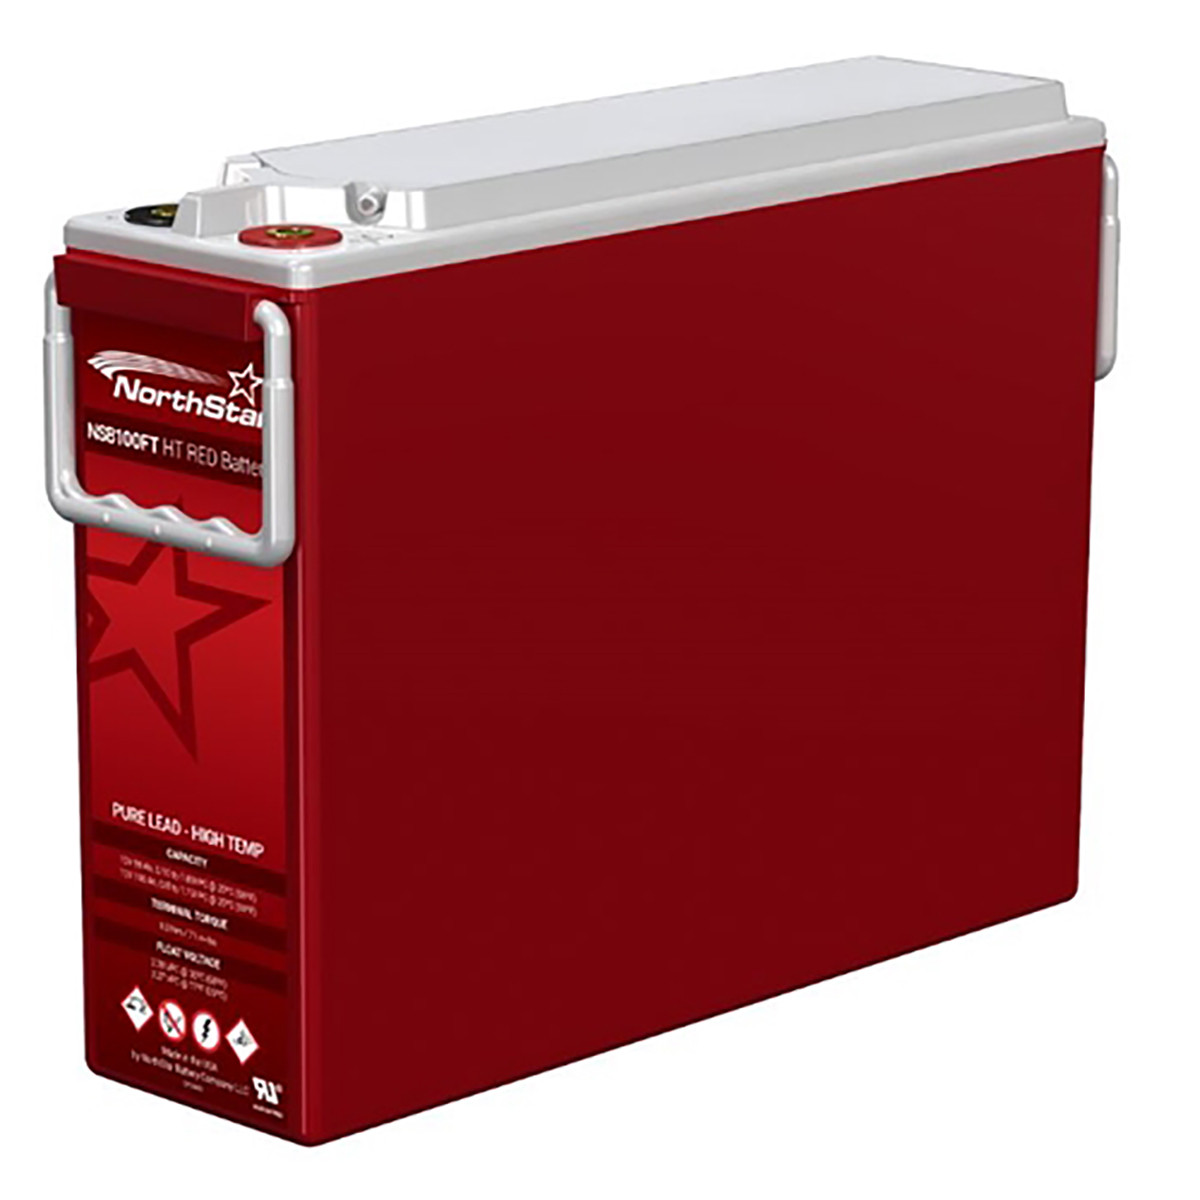 NorthStar NSB100FT HT RED Pure Lead - High Temp Battery Questions & Answers